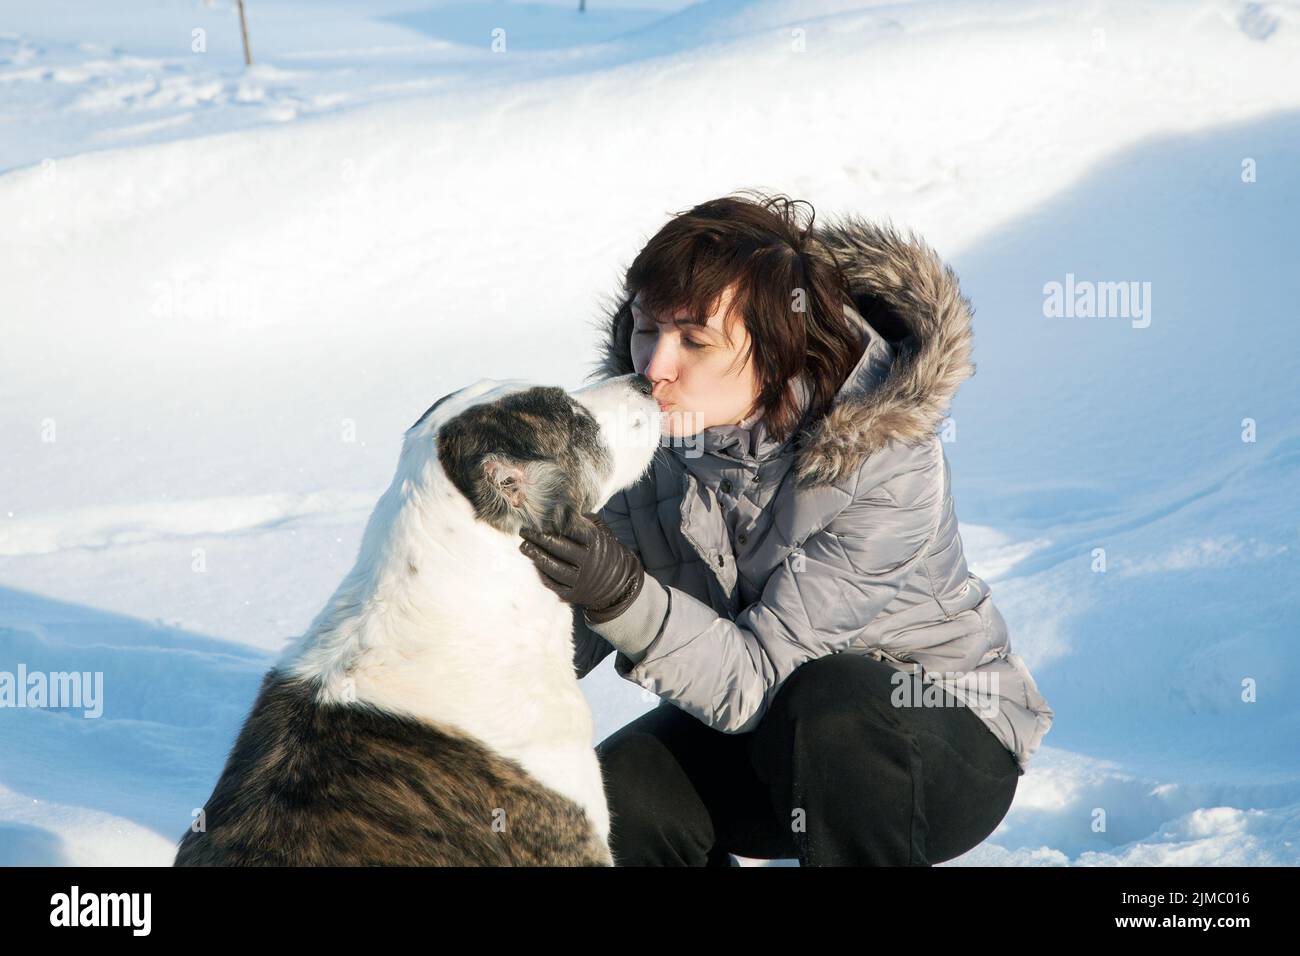 Woman kisses a dog on a sunny winter day Stock Photo